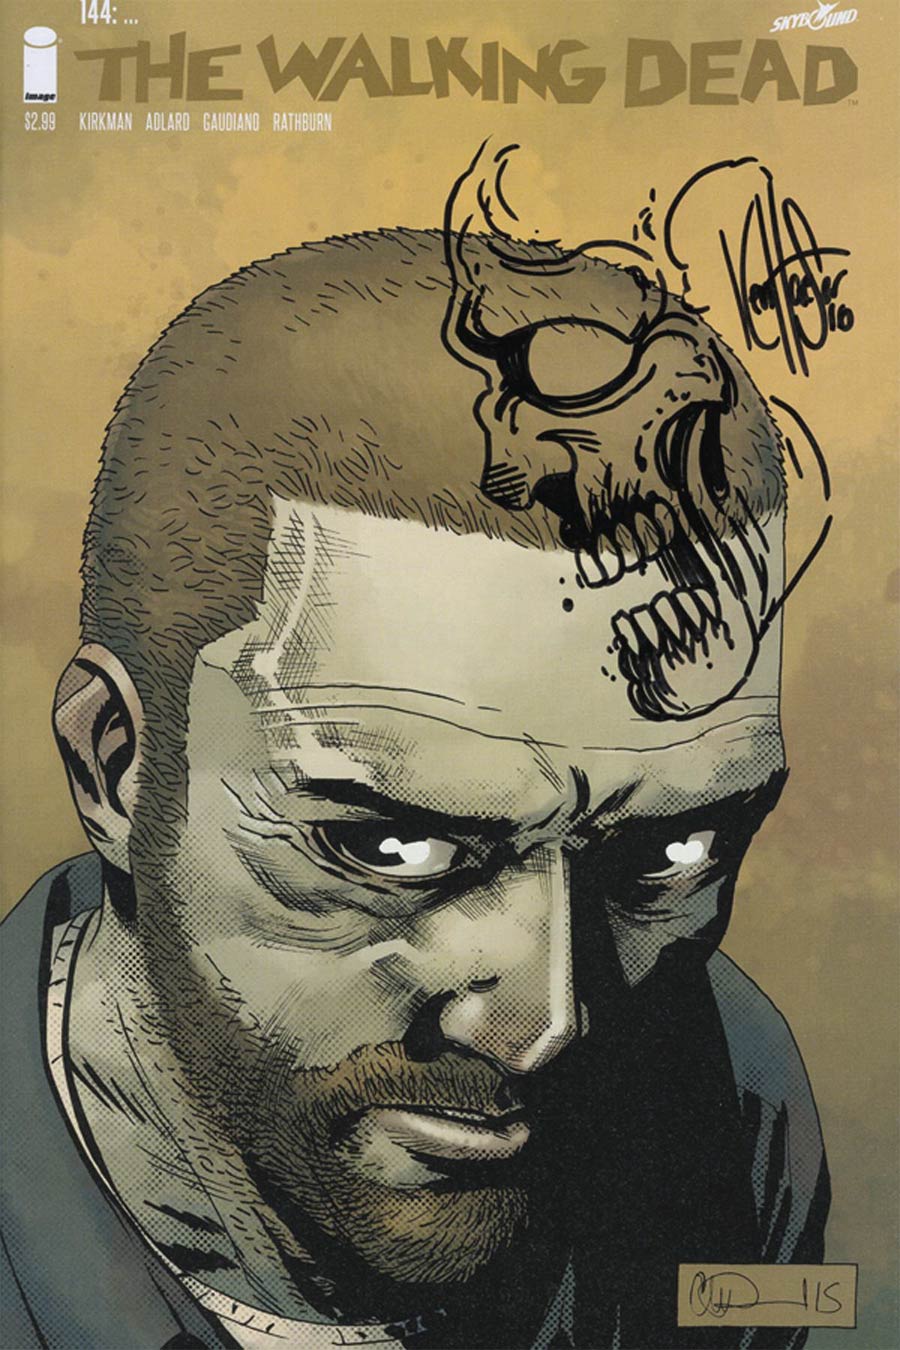 Walking Dead #144 Cover B DF Signed & Remarked With A Zombie Head Hand-Drawn Sketch By Ken Haeser